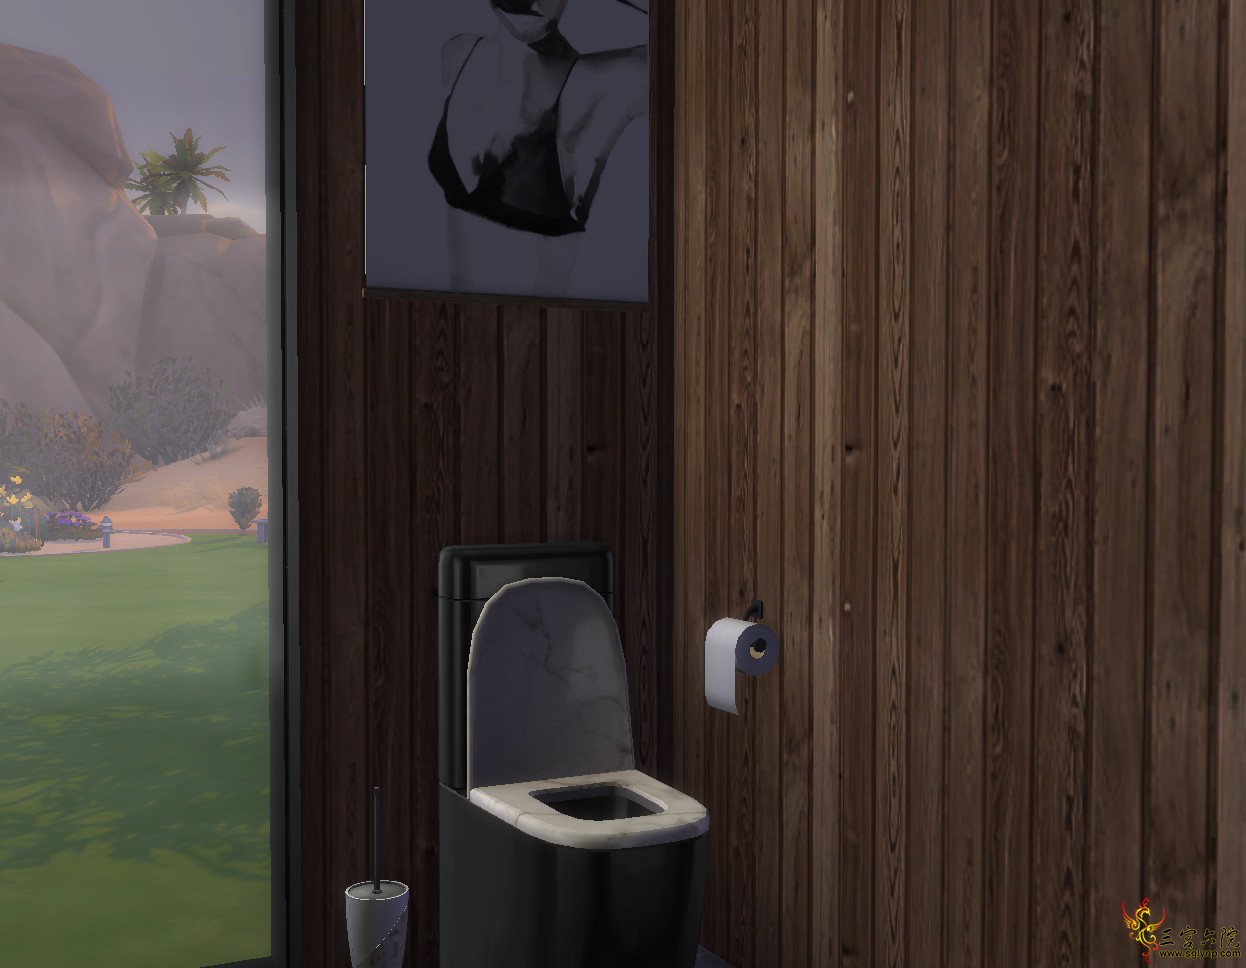 The Sims 4 2020_8_2 4_32_20.png